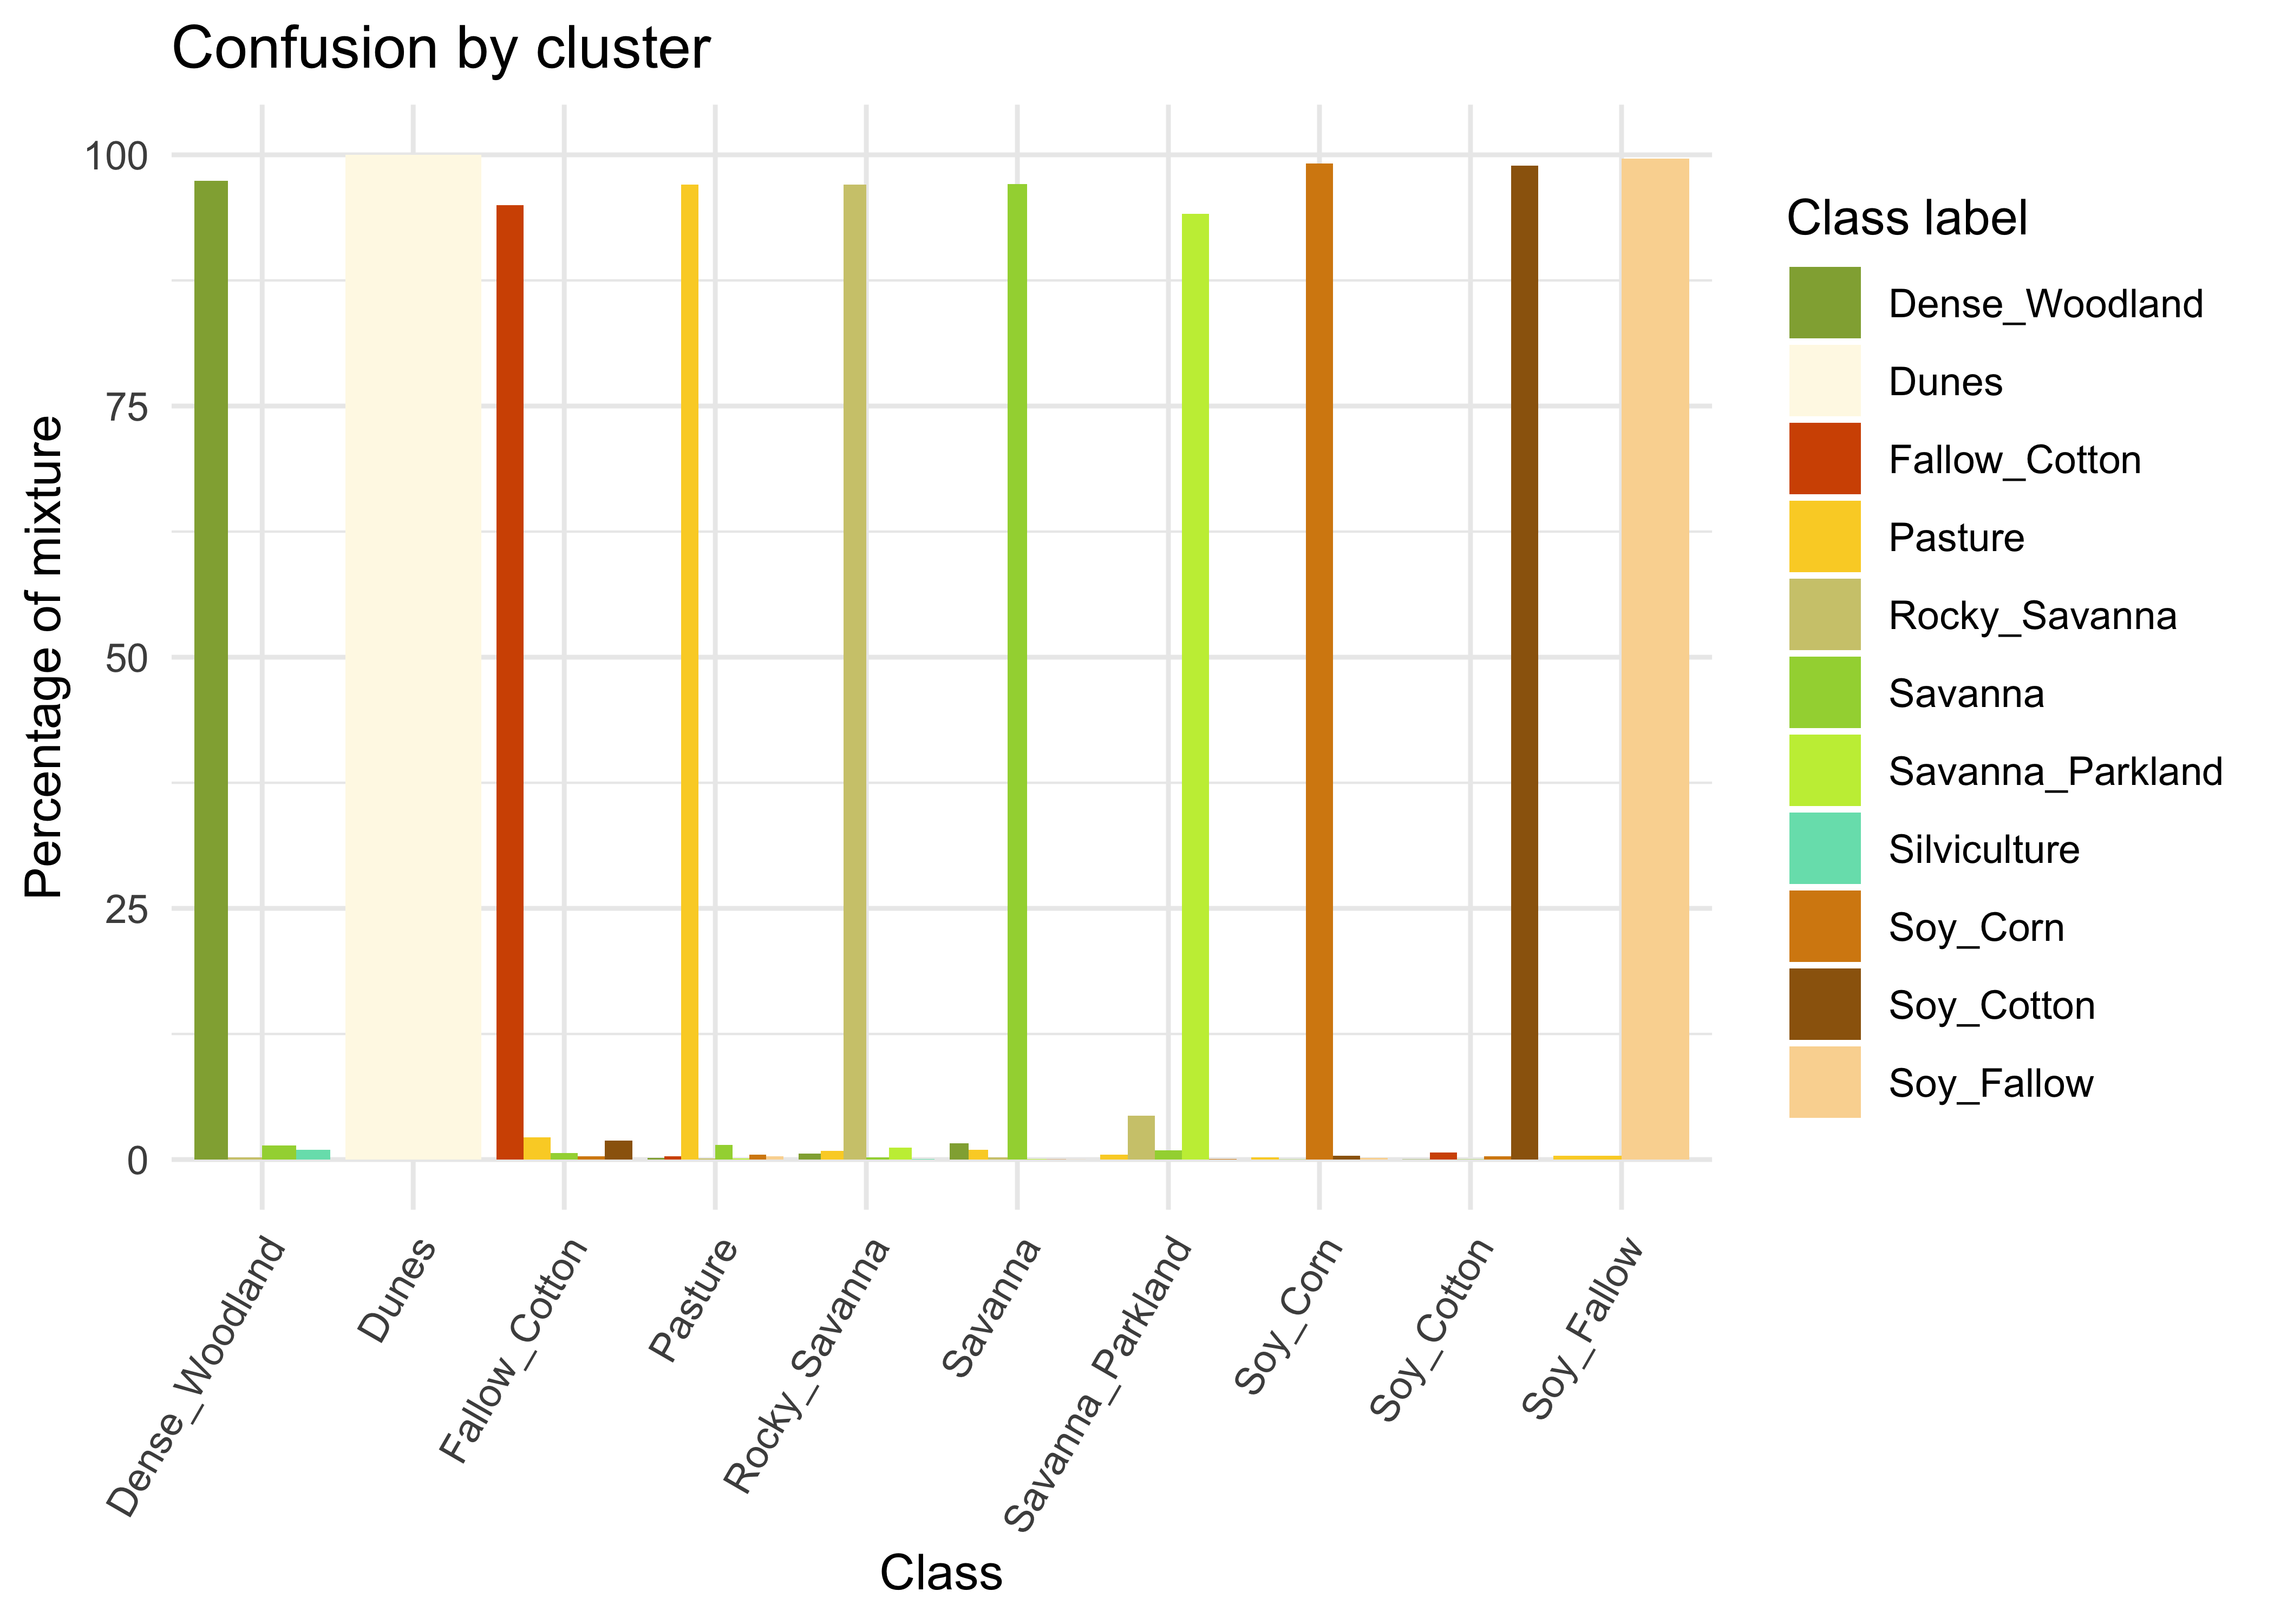 Cluster confusion plot for samples cleaned by SOM (Source: Authors).